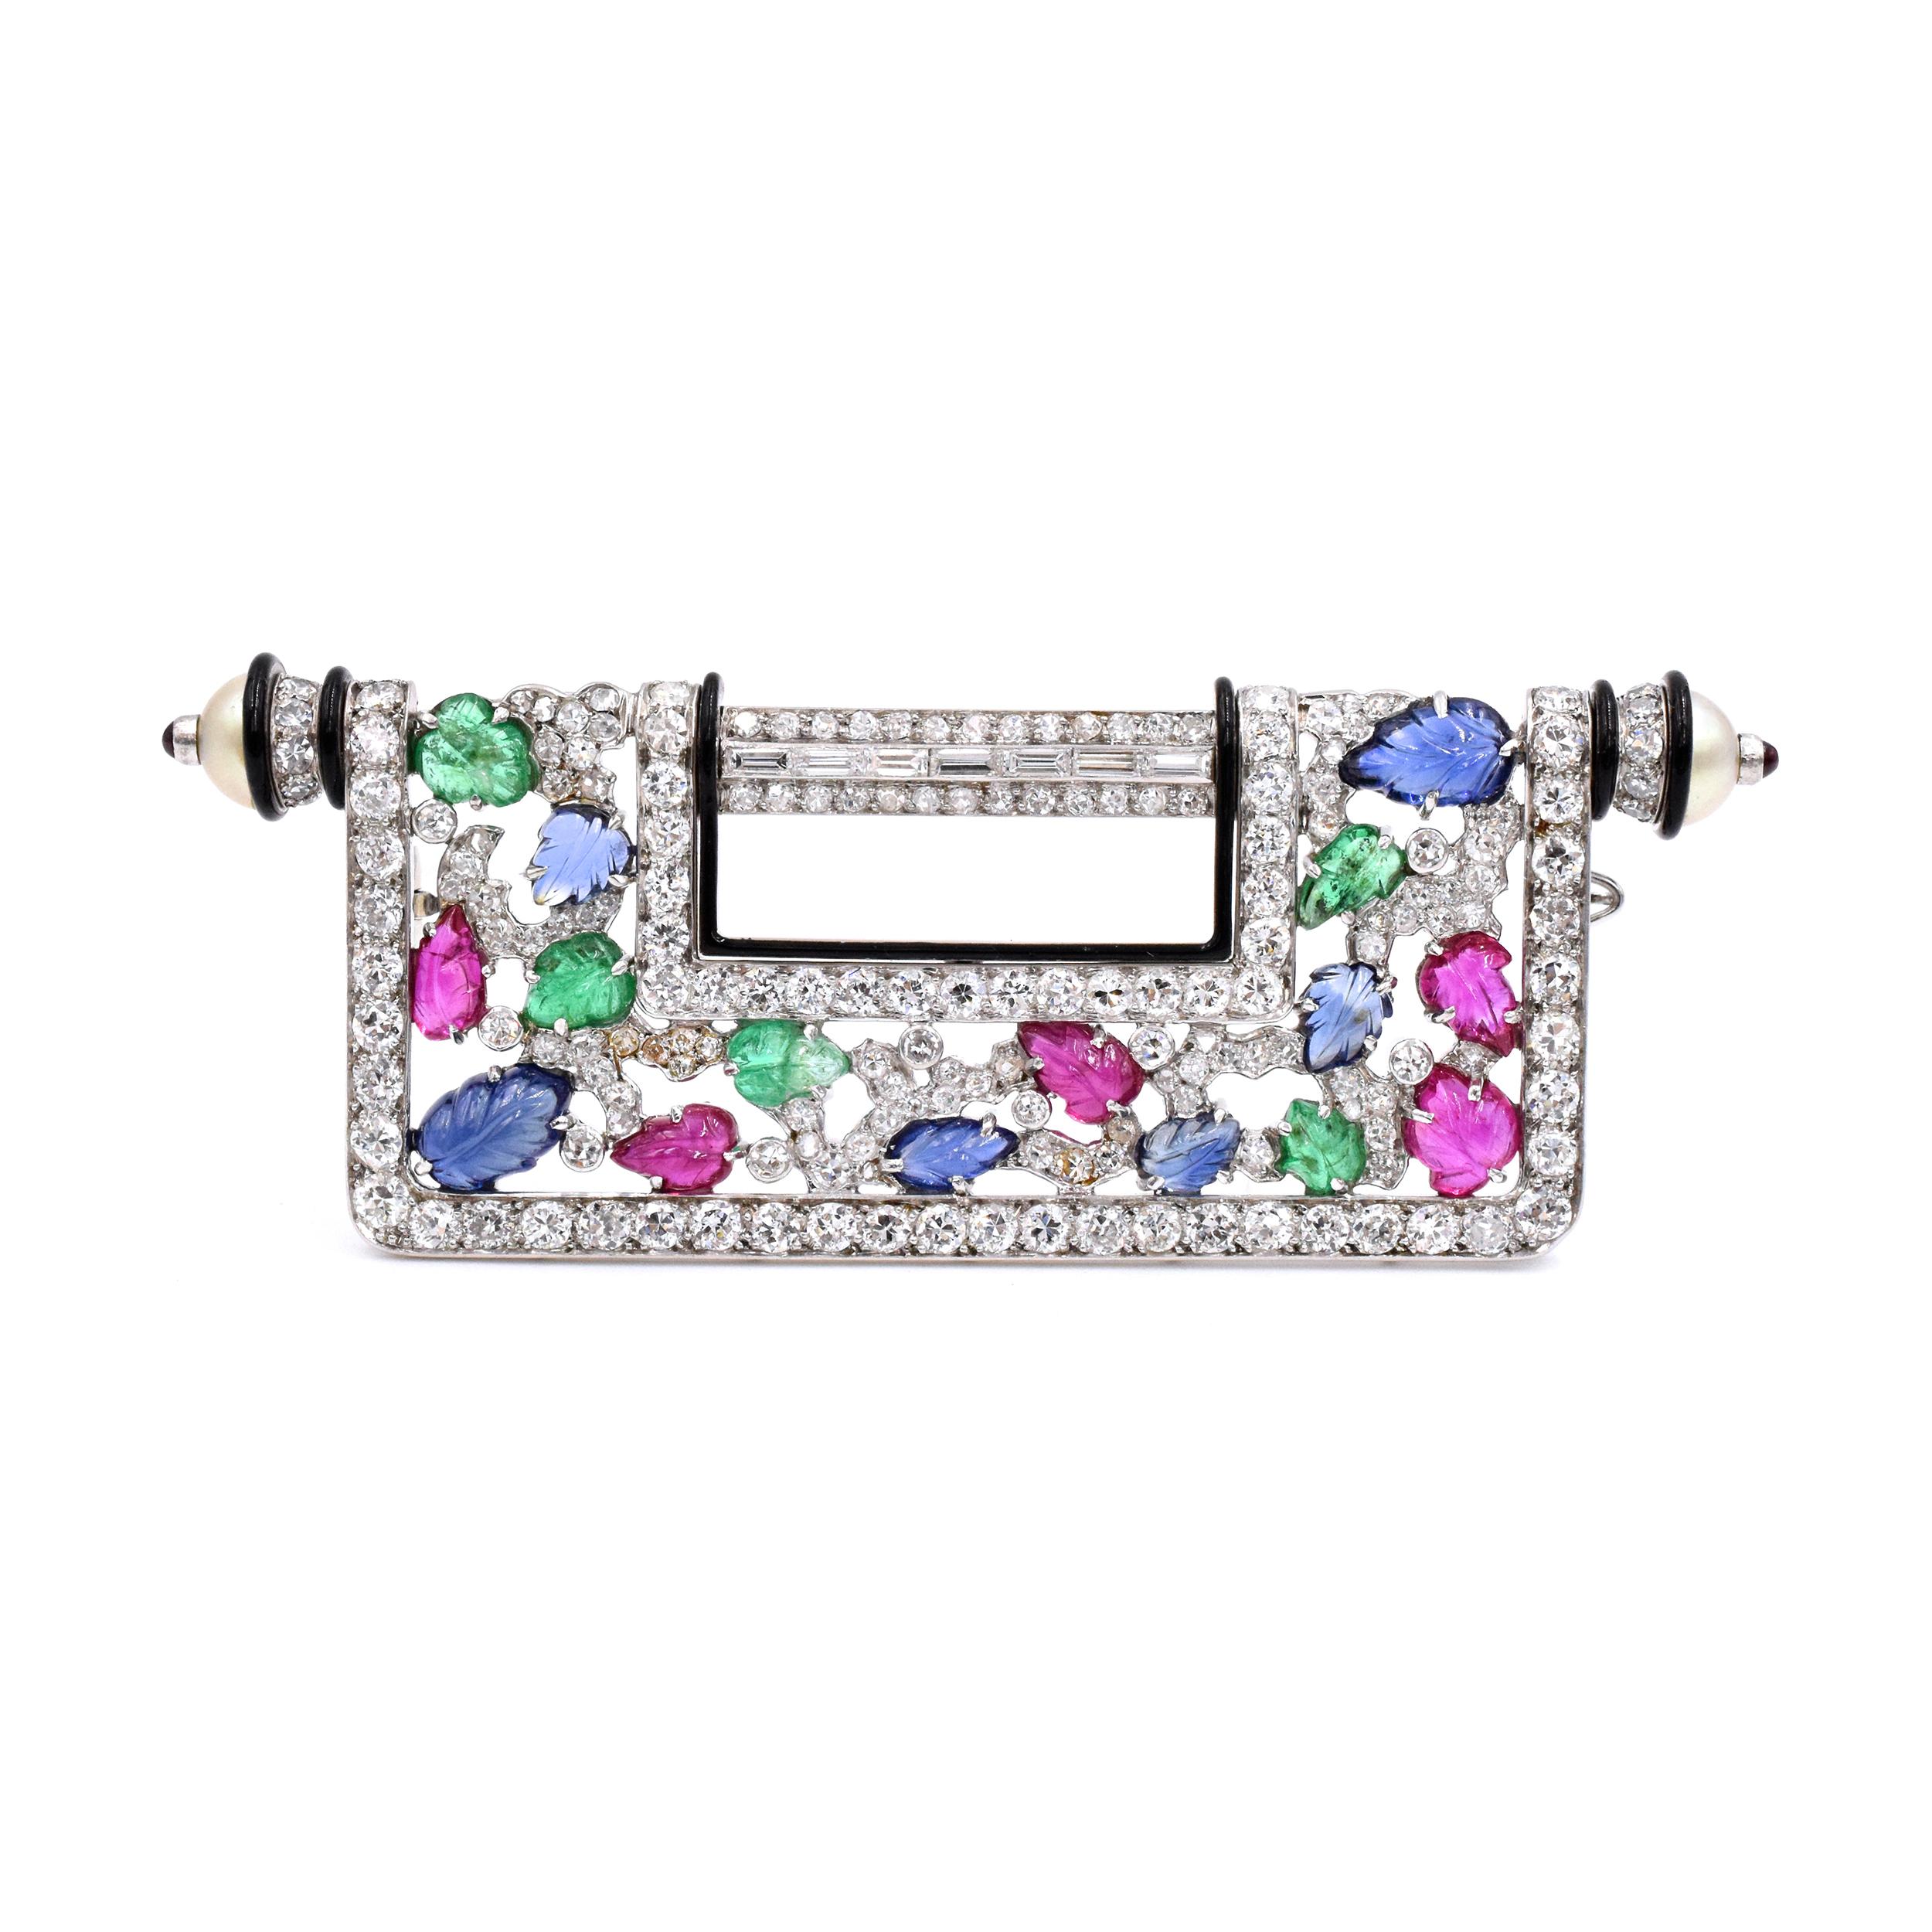 Gemstone and Diamond brooch. This brooch has diamonds, rubies, emerald, sapphire and black enamel, set in 18kt white gold and platinum. It has makers mark, french assay mark for Gold and Platinum, and Numbered: 1340. 
Measurements: 2.88 inches by 1